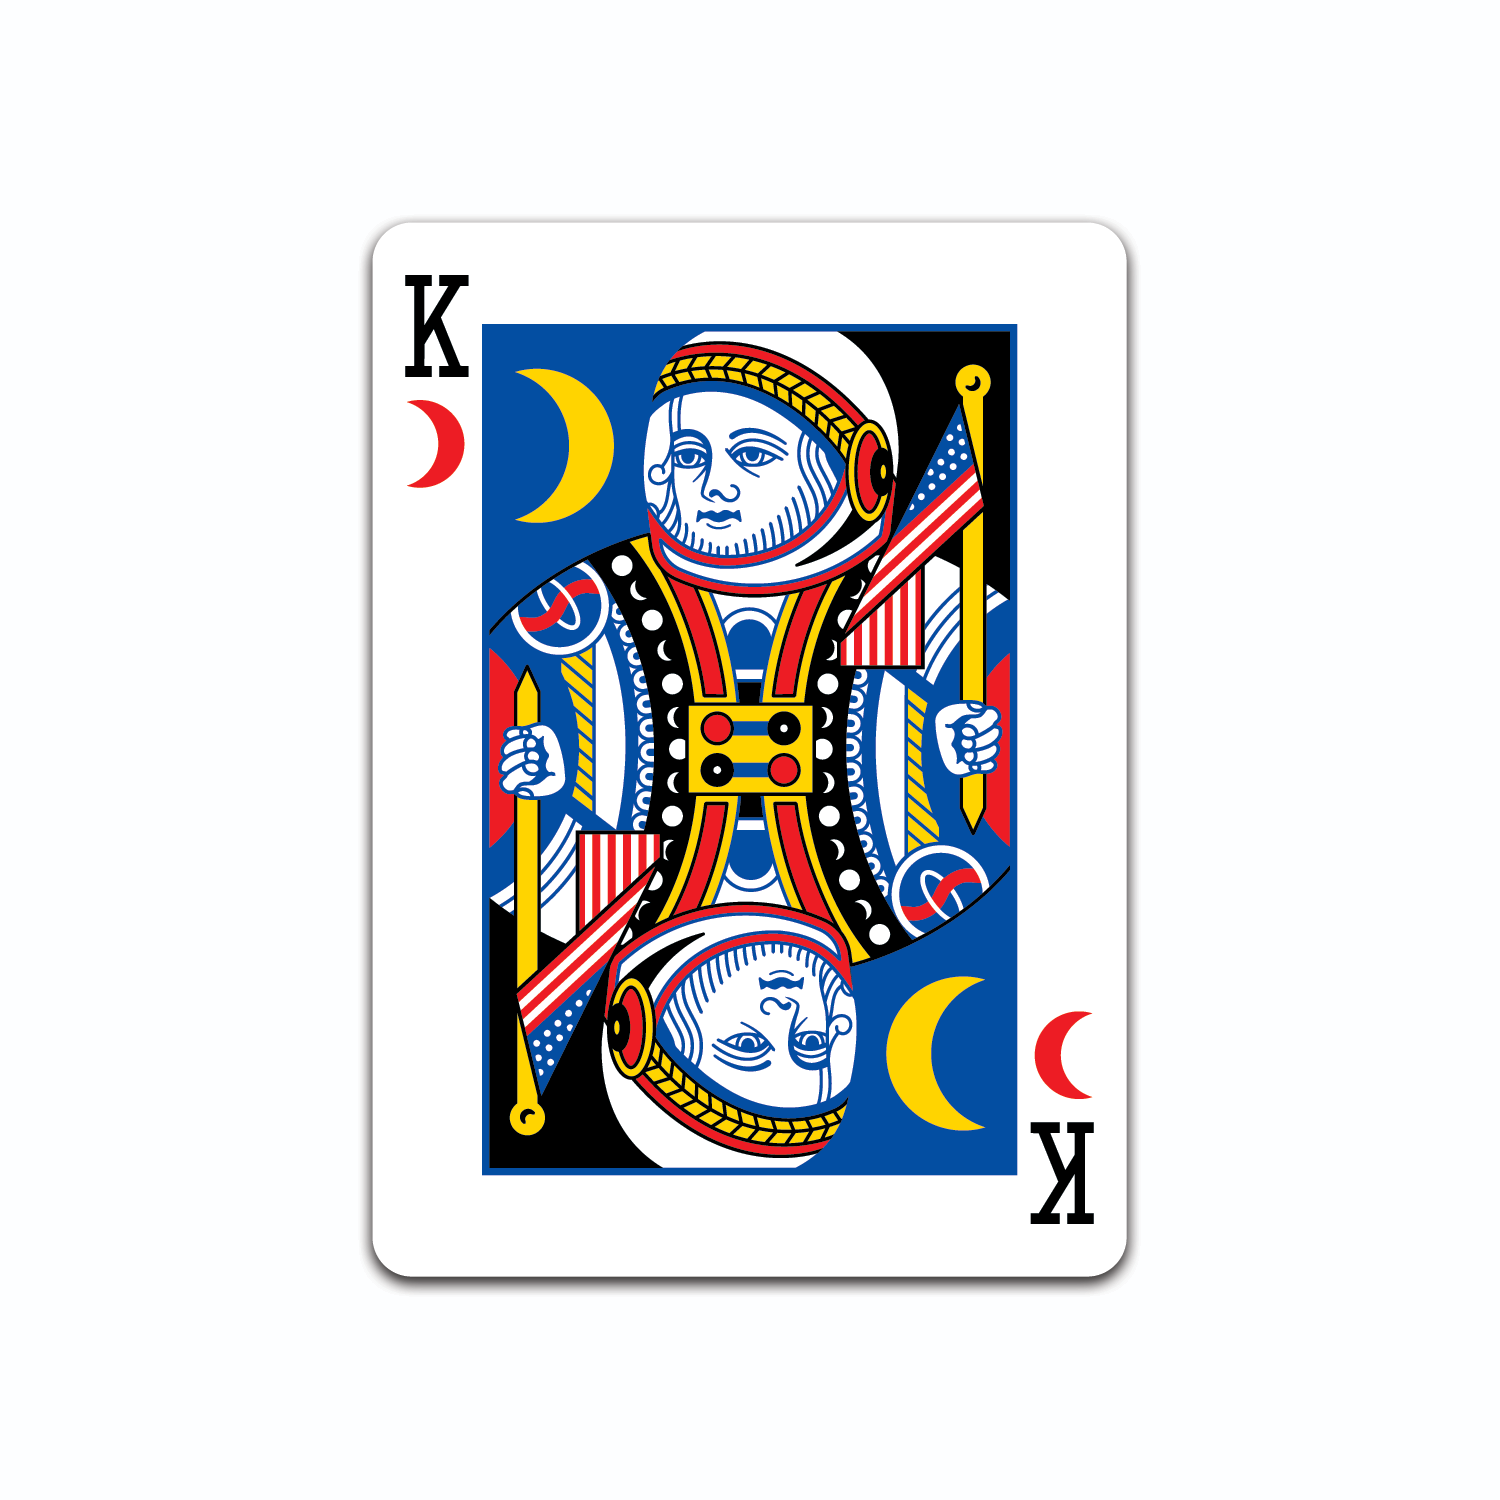 Thumbnail of "King of Moons" playing card sticker